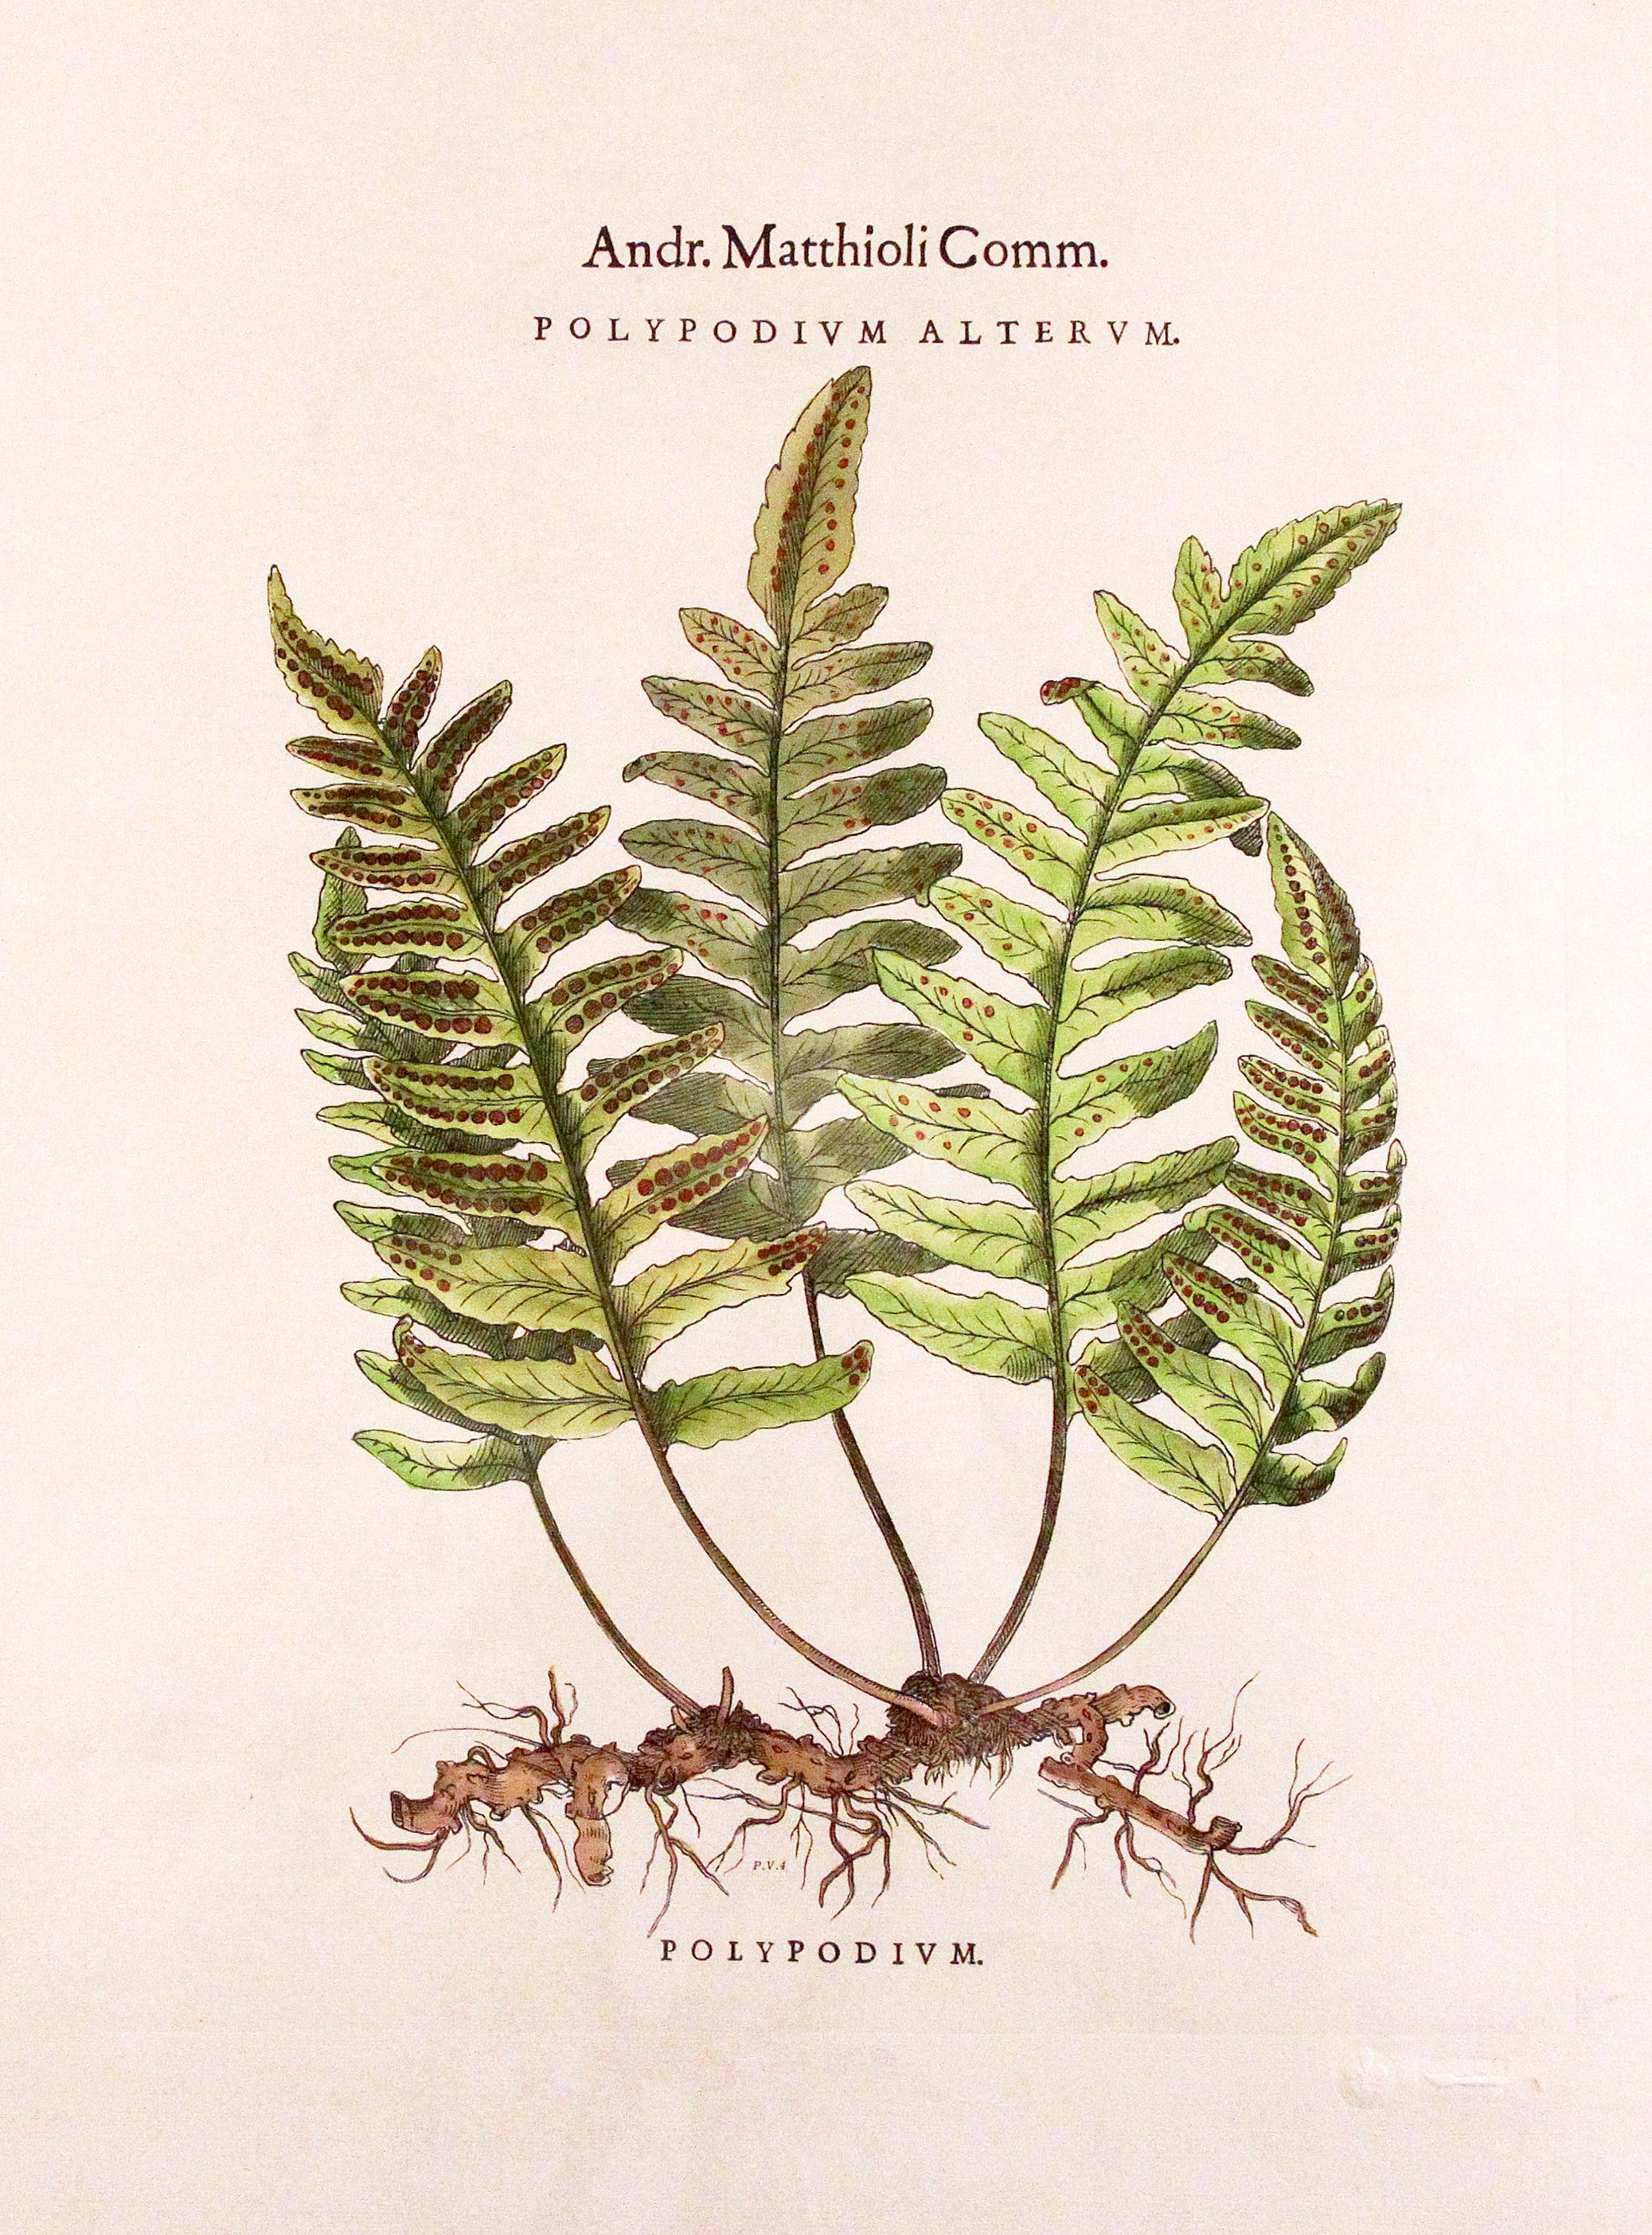 Andr. Matthioli Comm.
Polypodium Alternum in gold frame with Pale Laurel mat
Measures 22 W x 28 H x 1 D 

Polypodium is a genus of ferns in the family Polypodiaceae, subfamily Polypodioideae, The genus is widely distributed throughout the world,